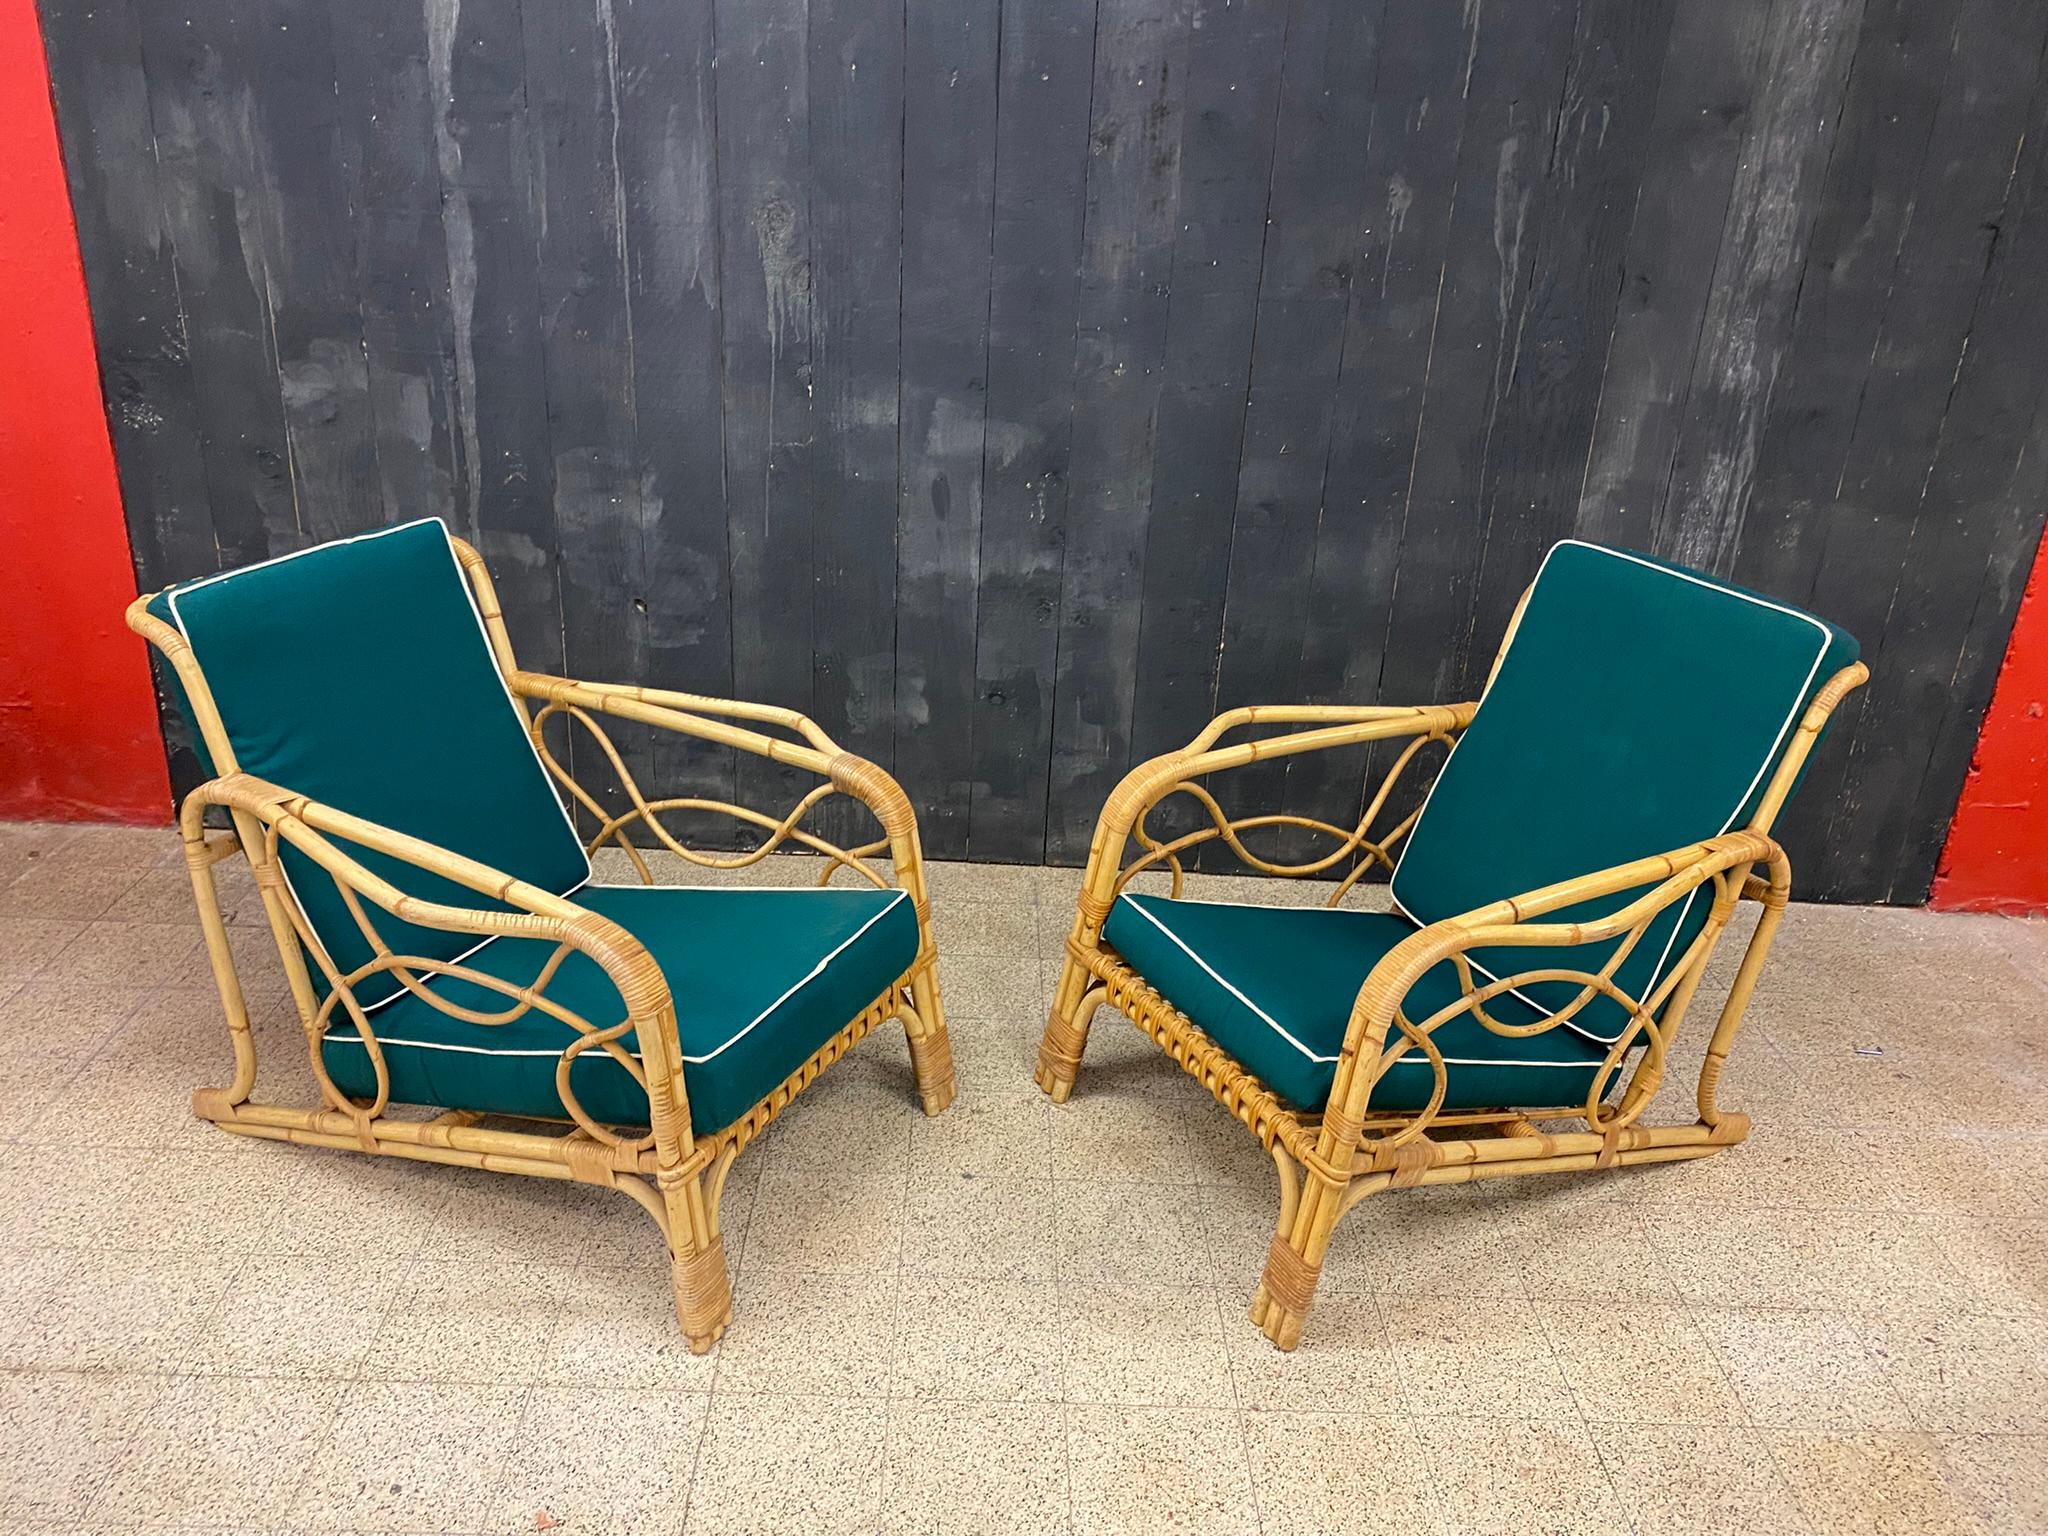 2 bamboo and rattan armchairs and their cushions circa 1970
2 sets of cushions, 1 green set and 1 gray set 
structure and cushion in very good condition.